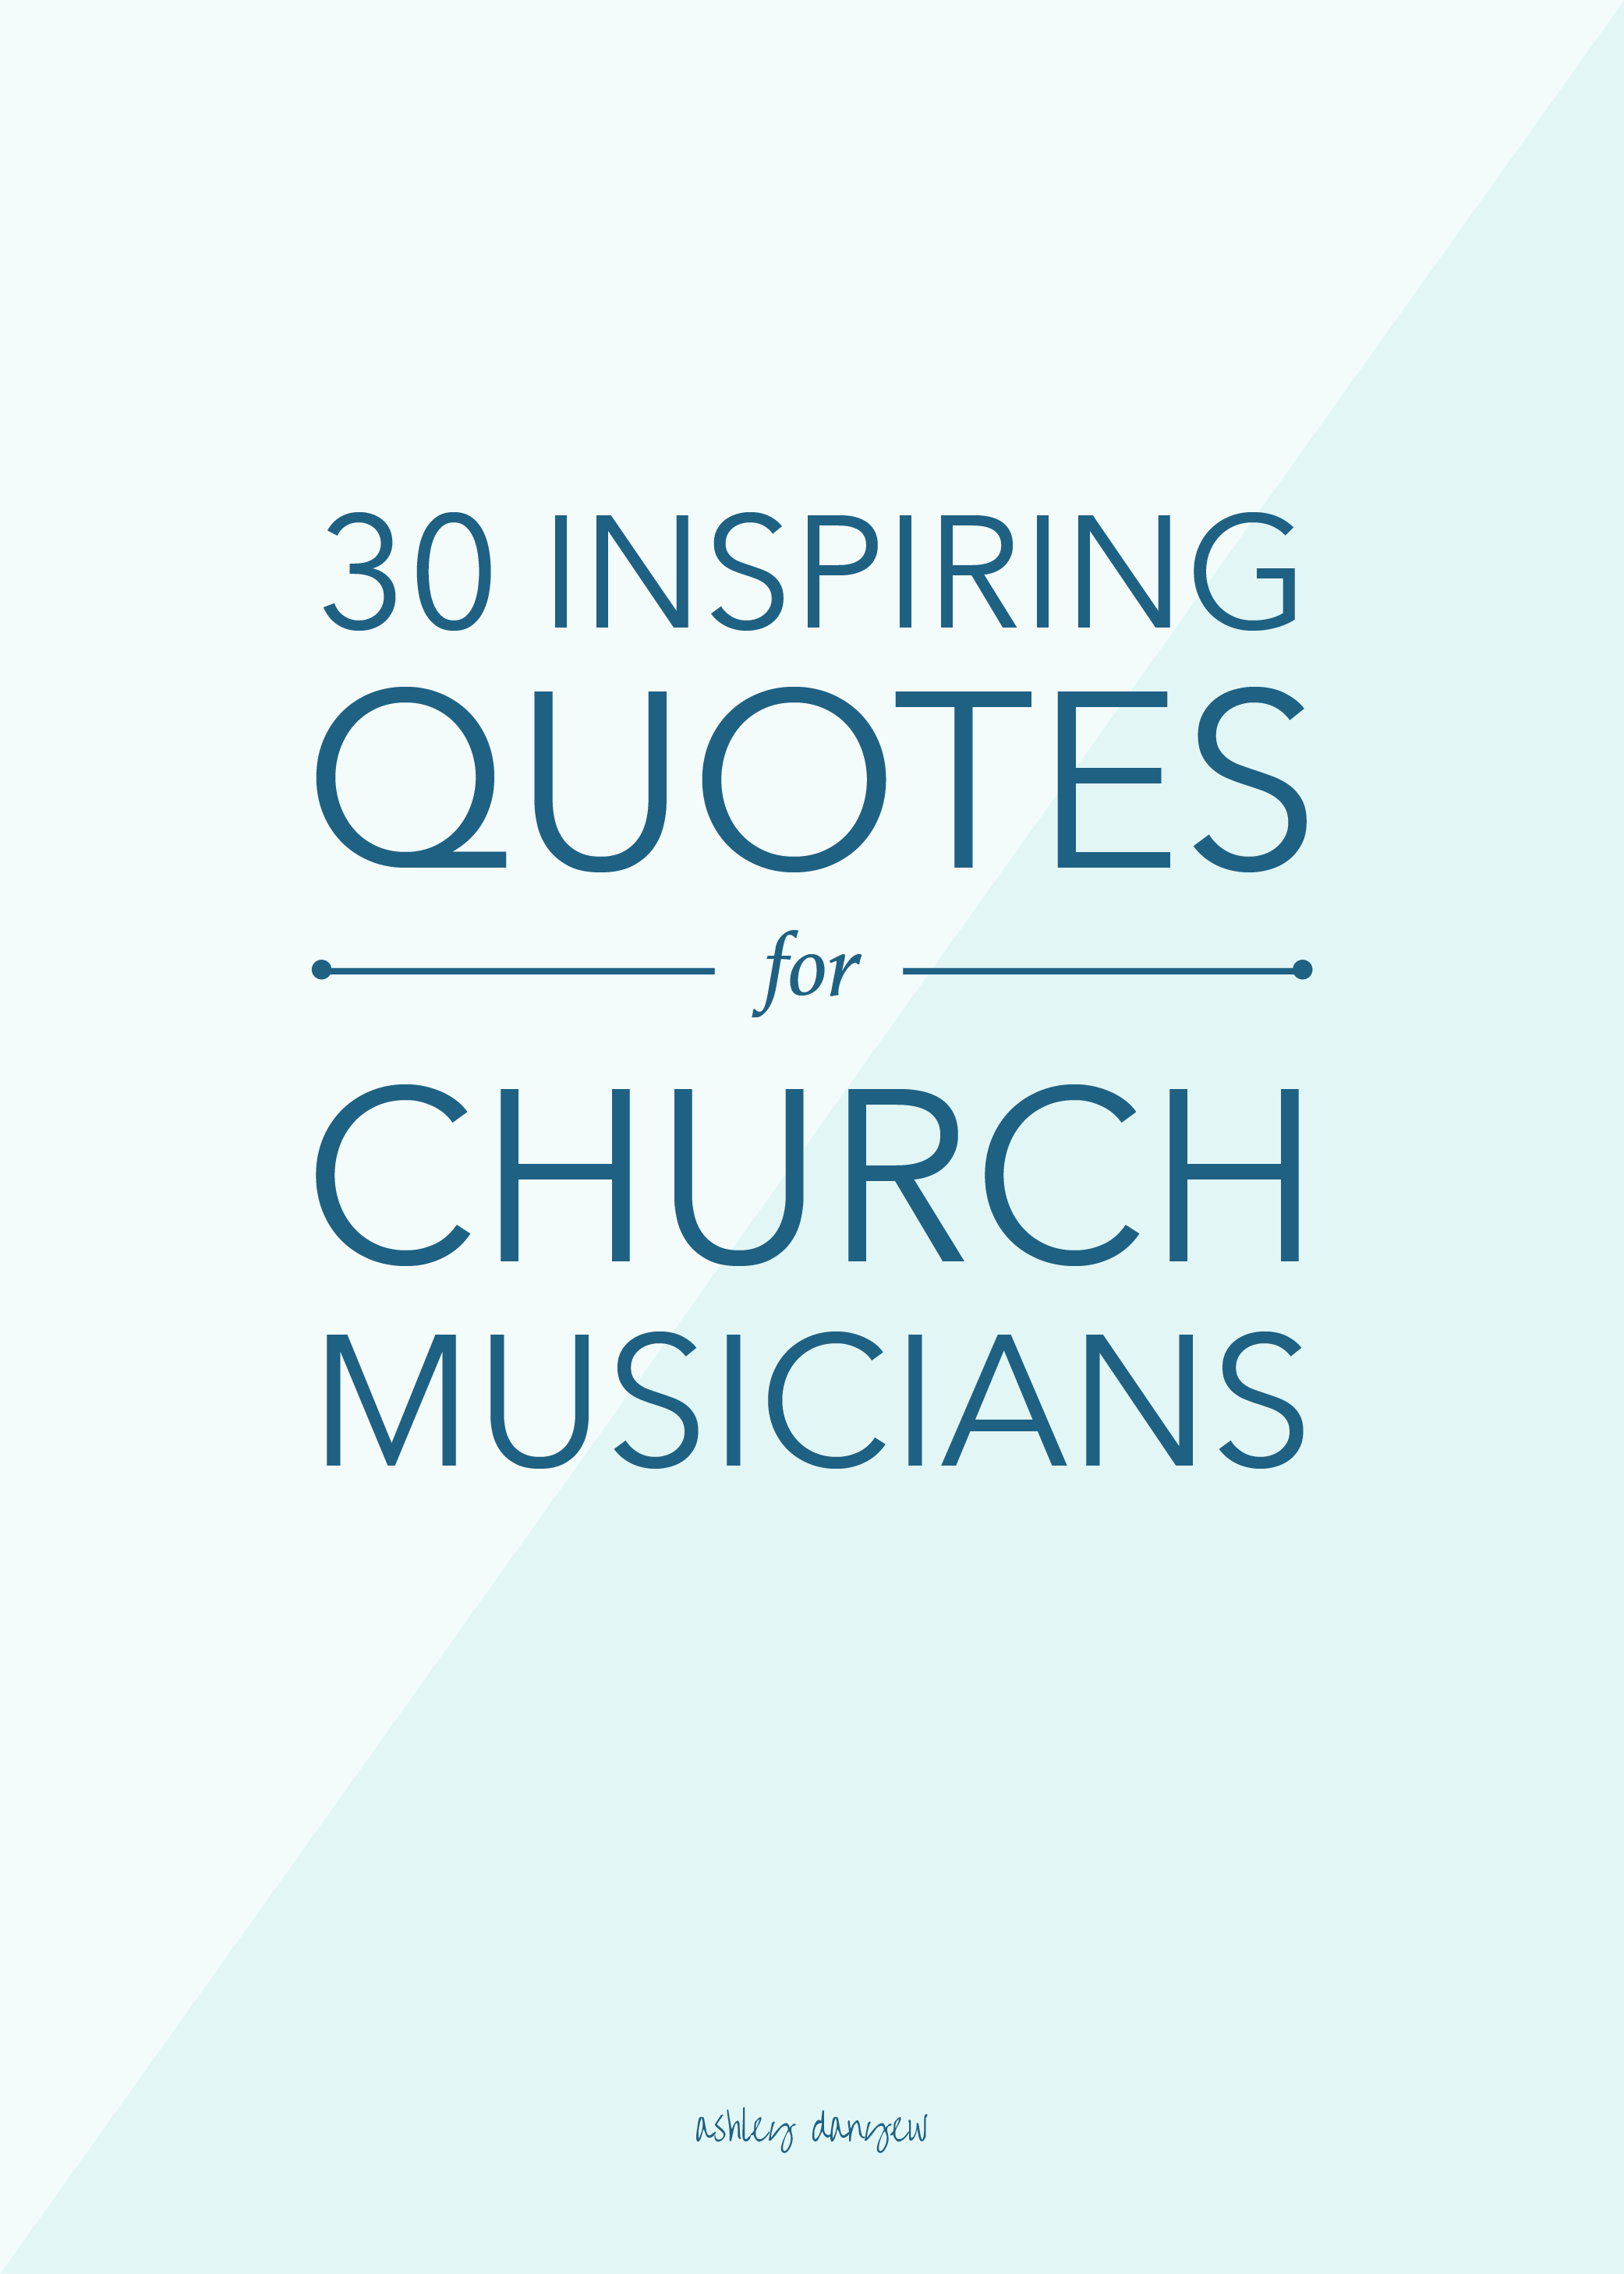 Copy of 30 Inspiring Quotes for Church Musicians